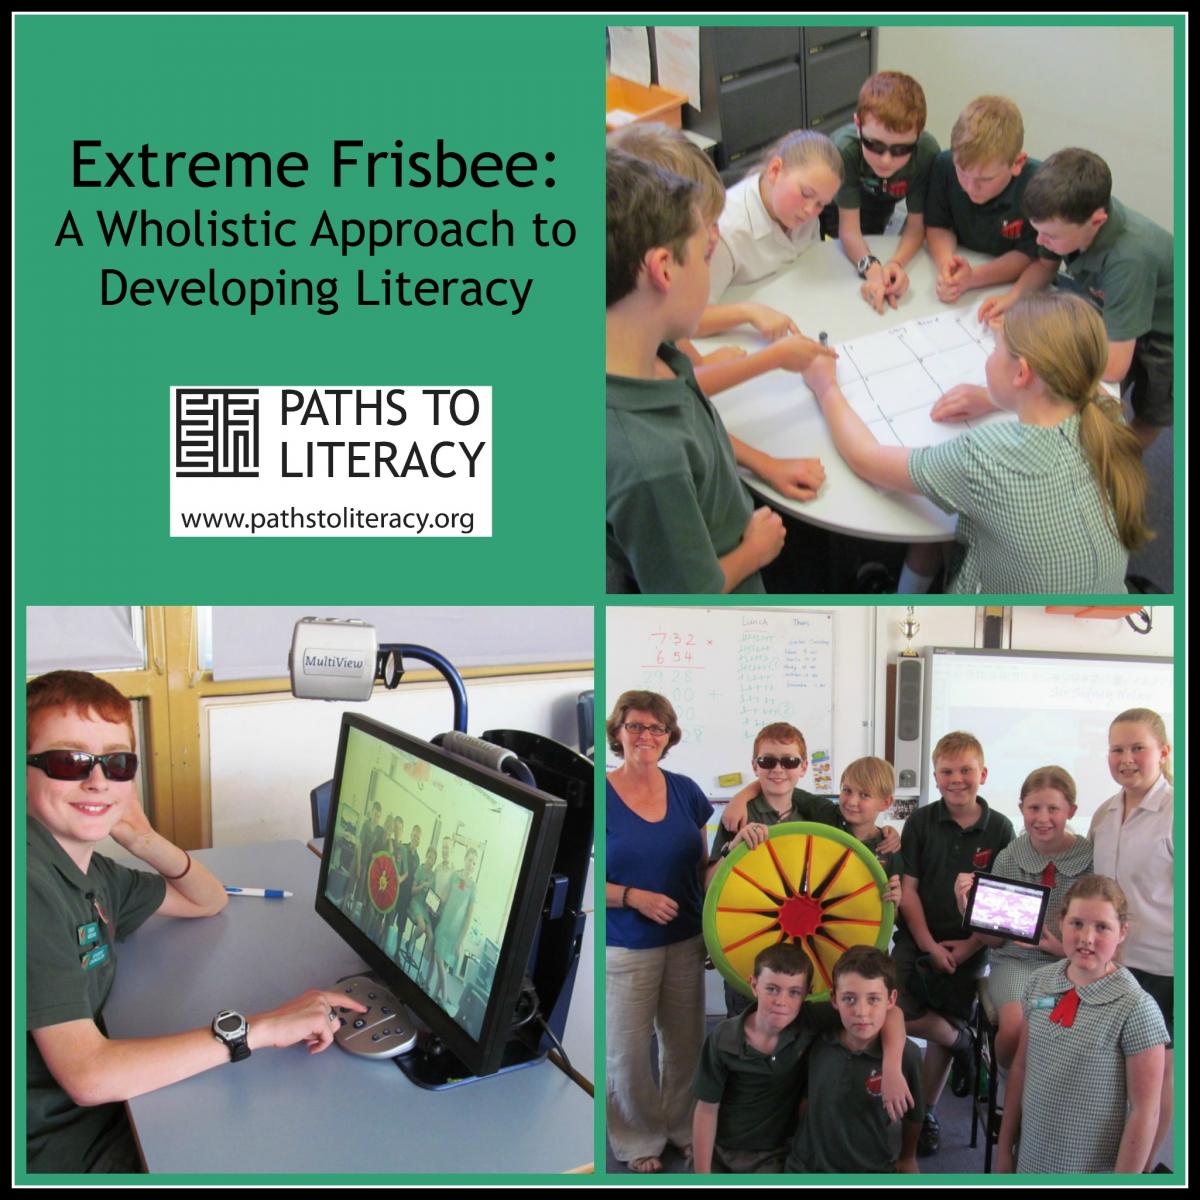 Extreme Frisbee as a Literacy Tool